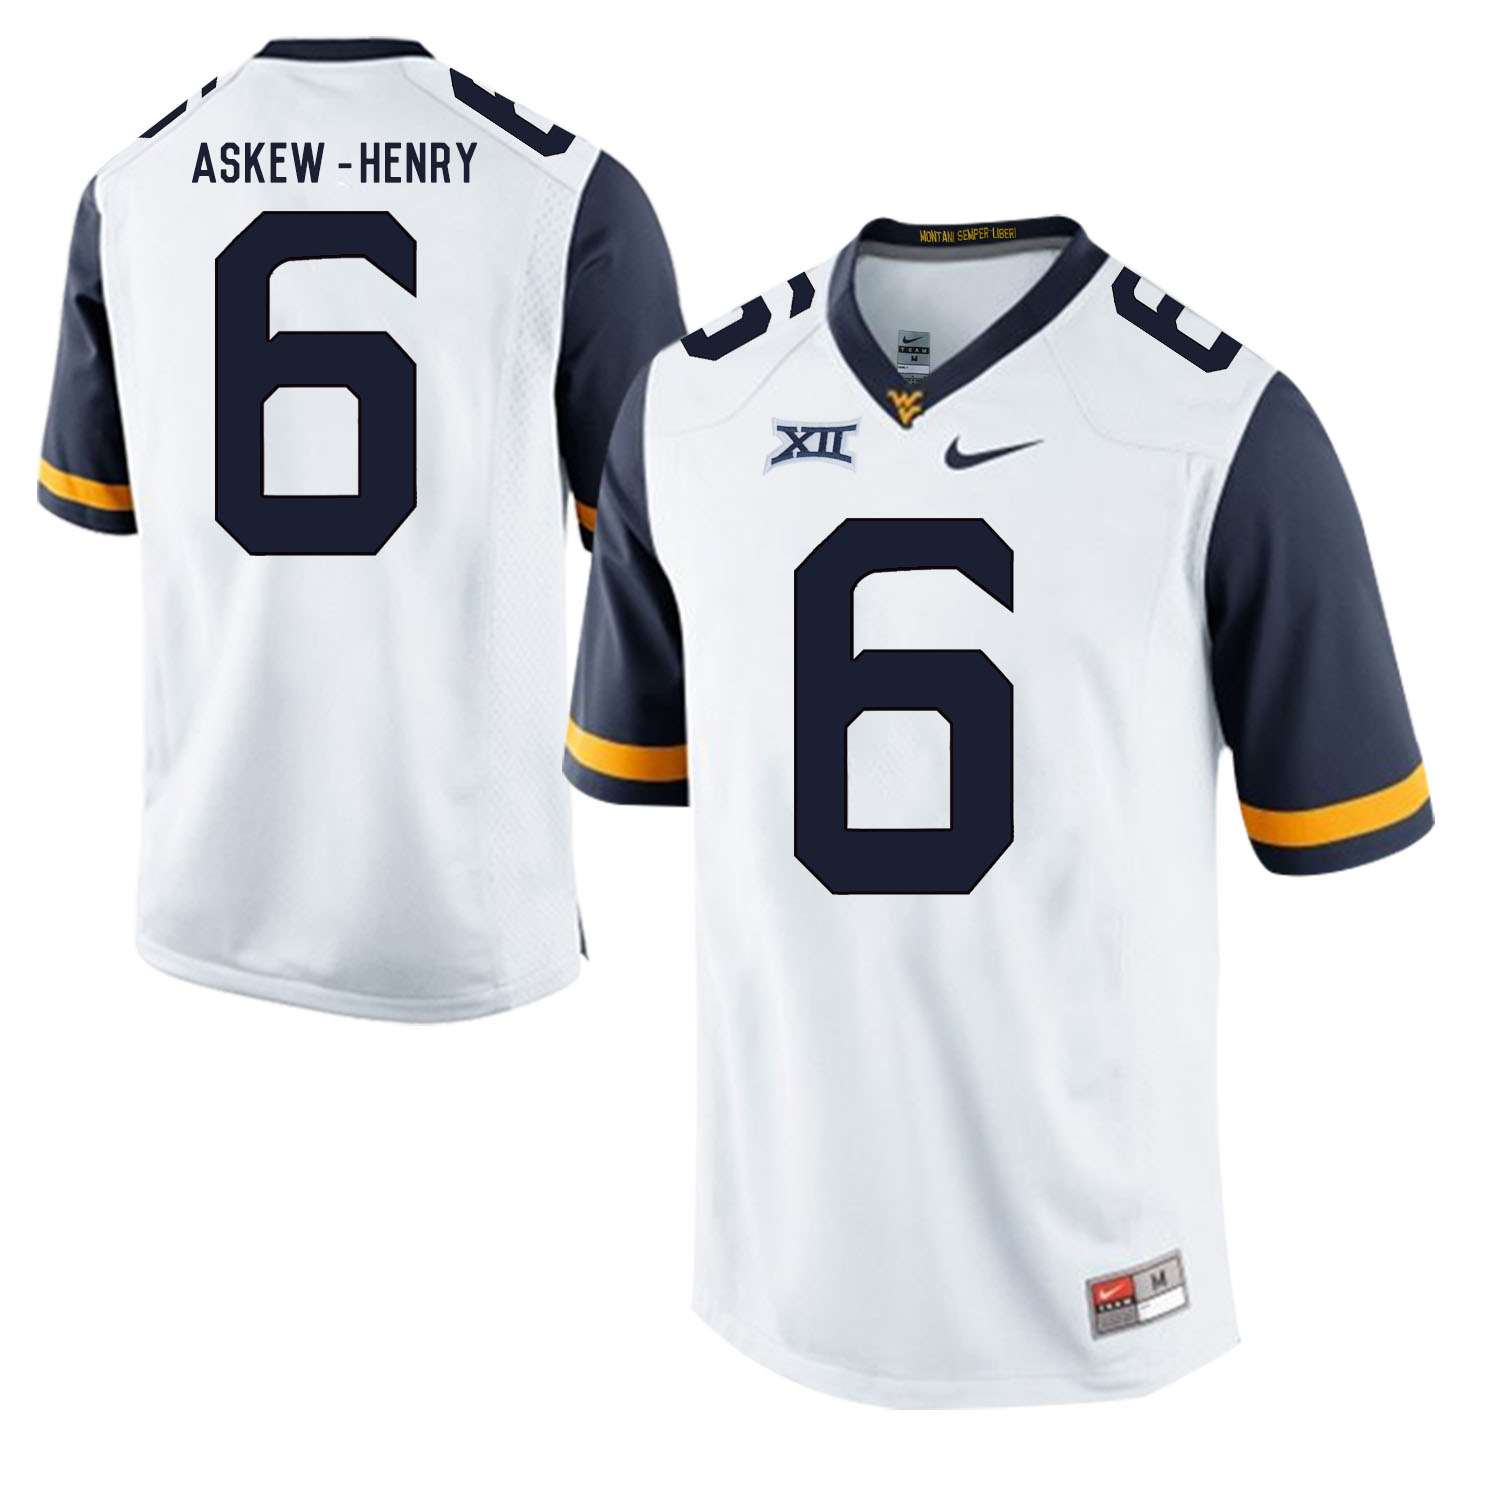 West Virginia Mountaineers 6 Dravon Askew-Henry White College Football Jersey